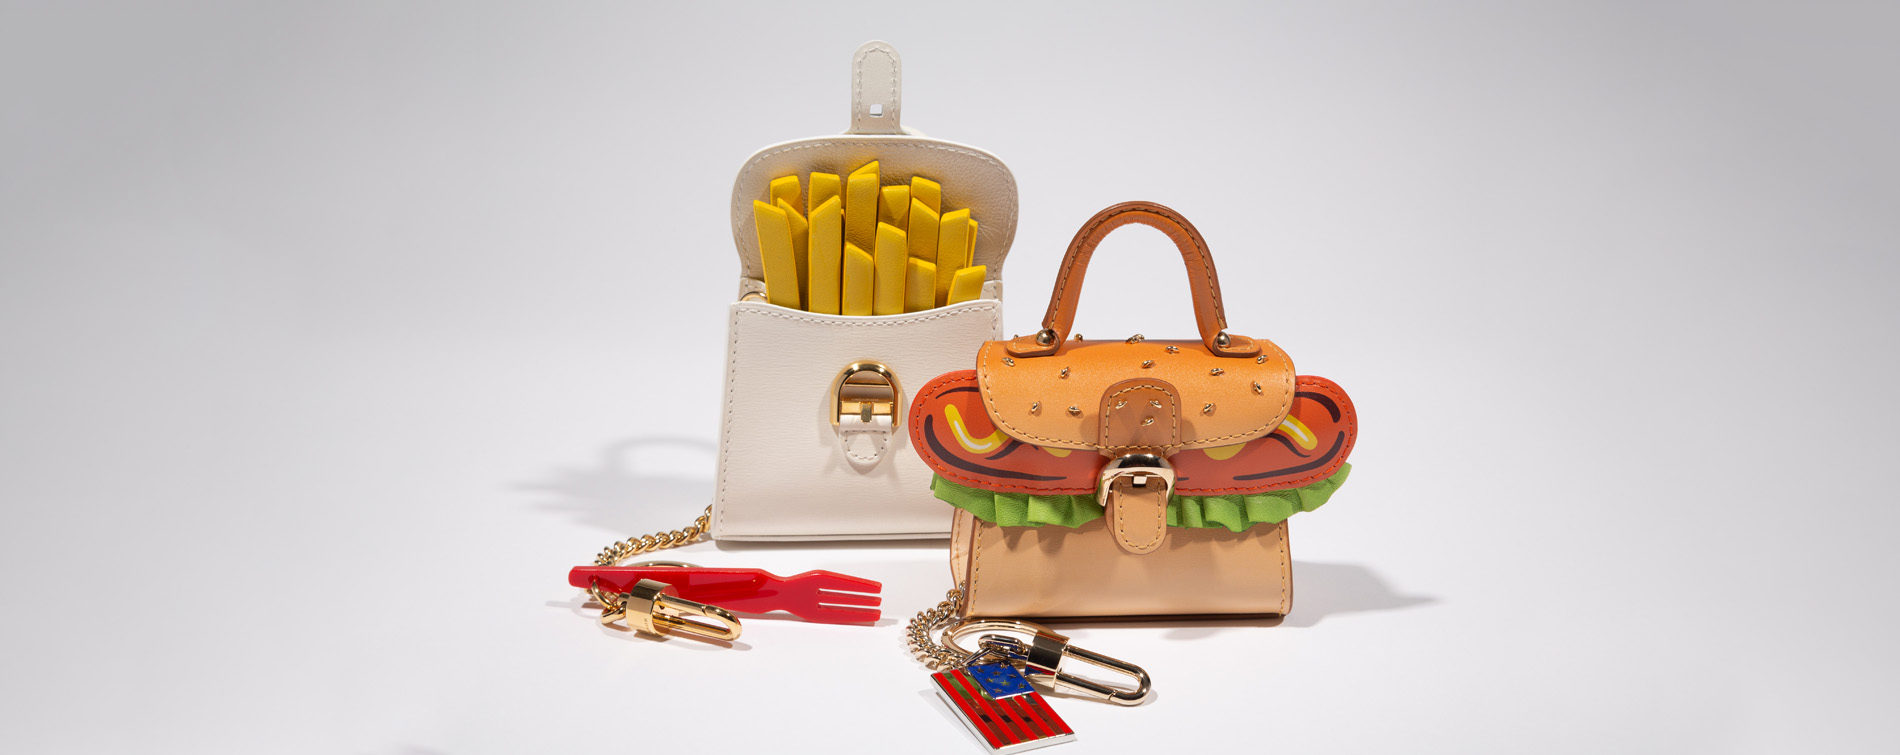 Delvaux, French fries and burger miniature leather bags, 2017, Belgium. Gift of Delvaux